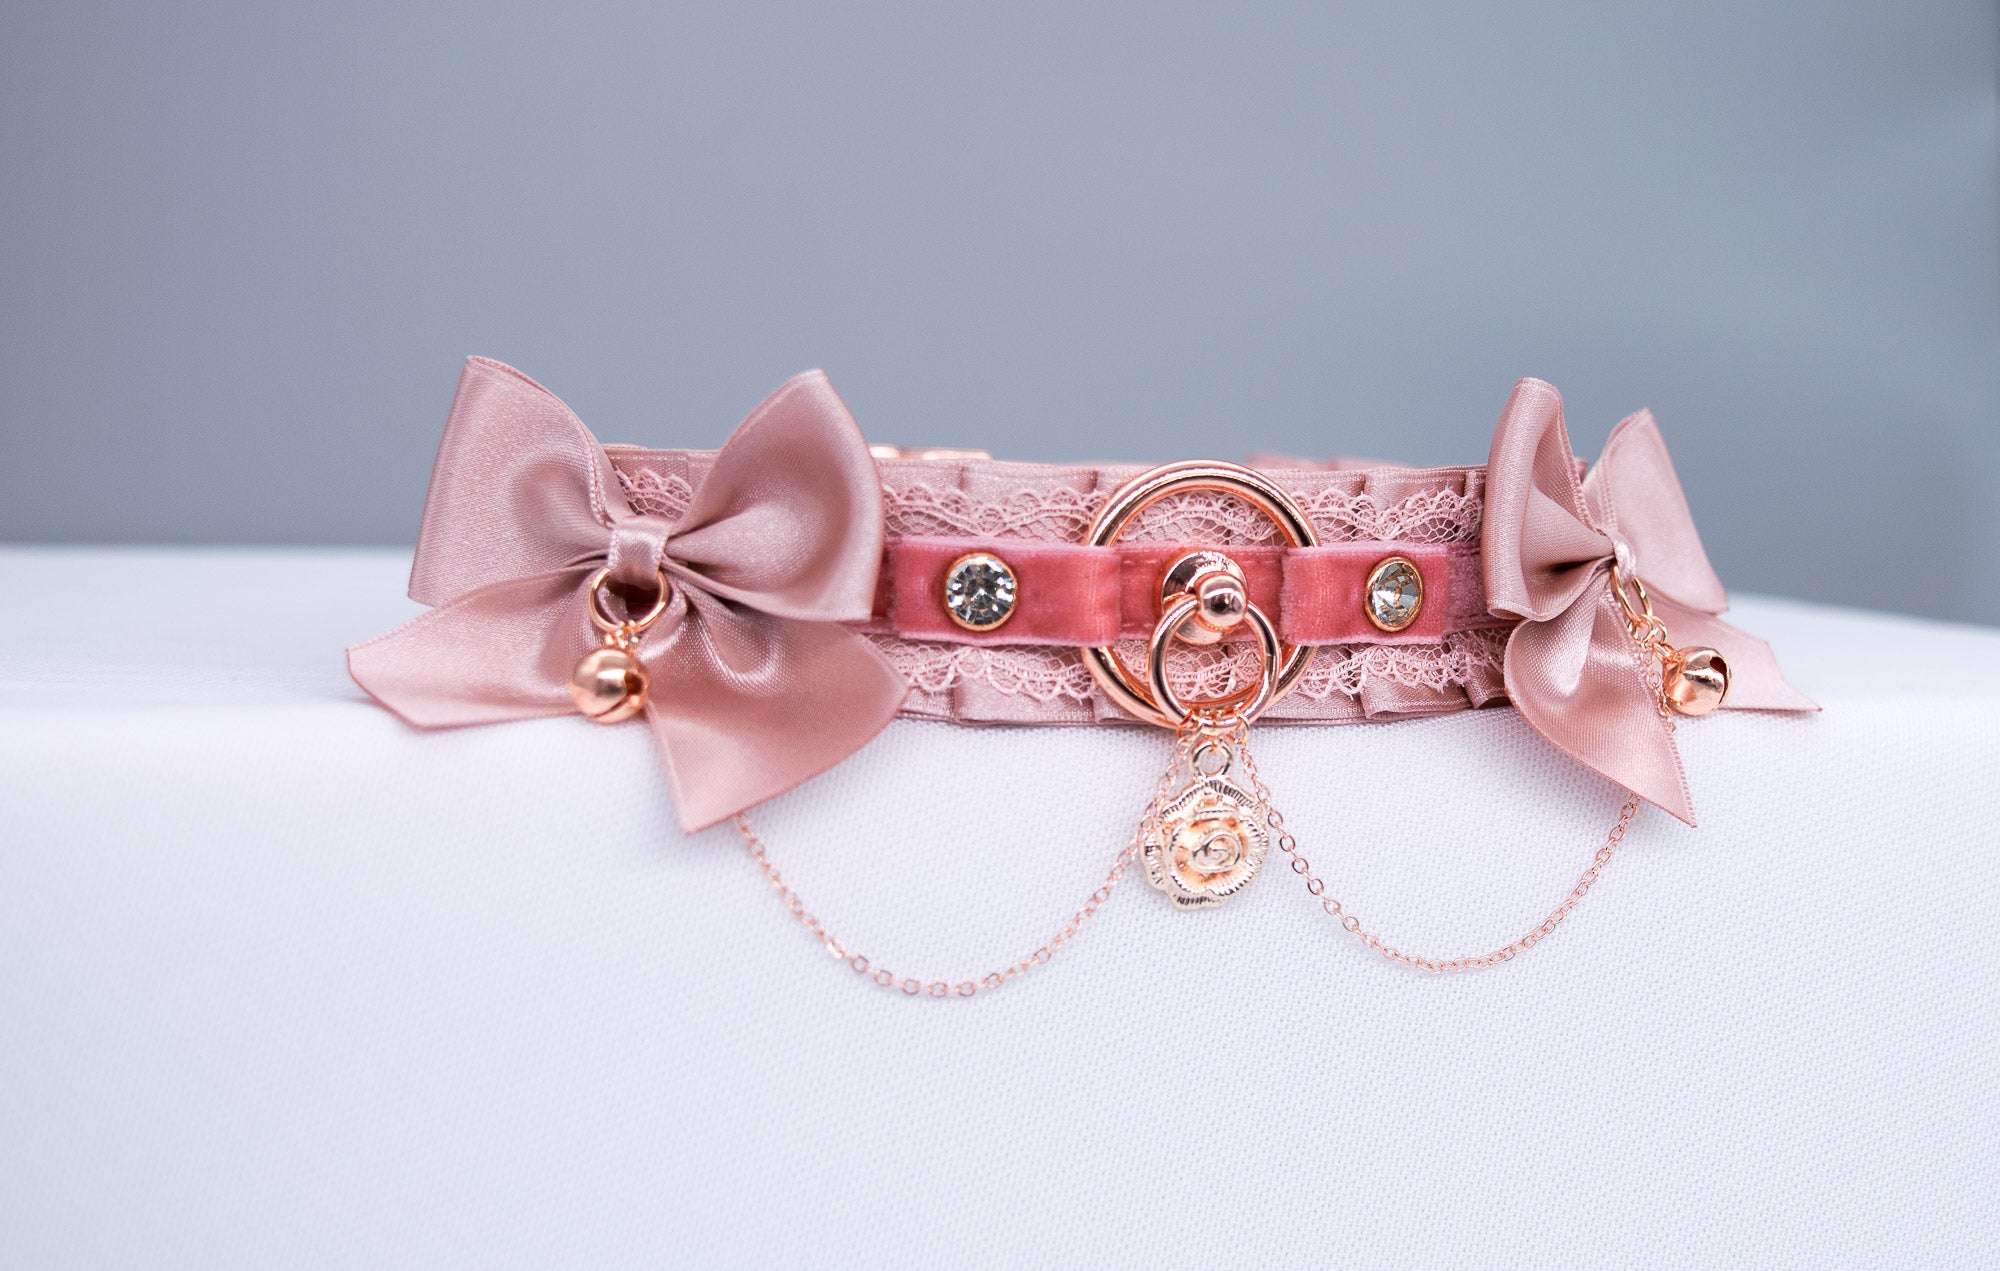 Chained Blush Velvet and Dusty Rose Bows - BDSM Collar in Rose Gold